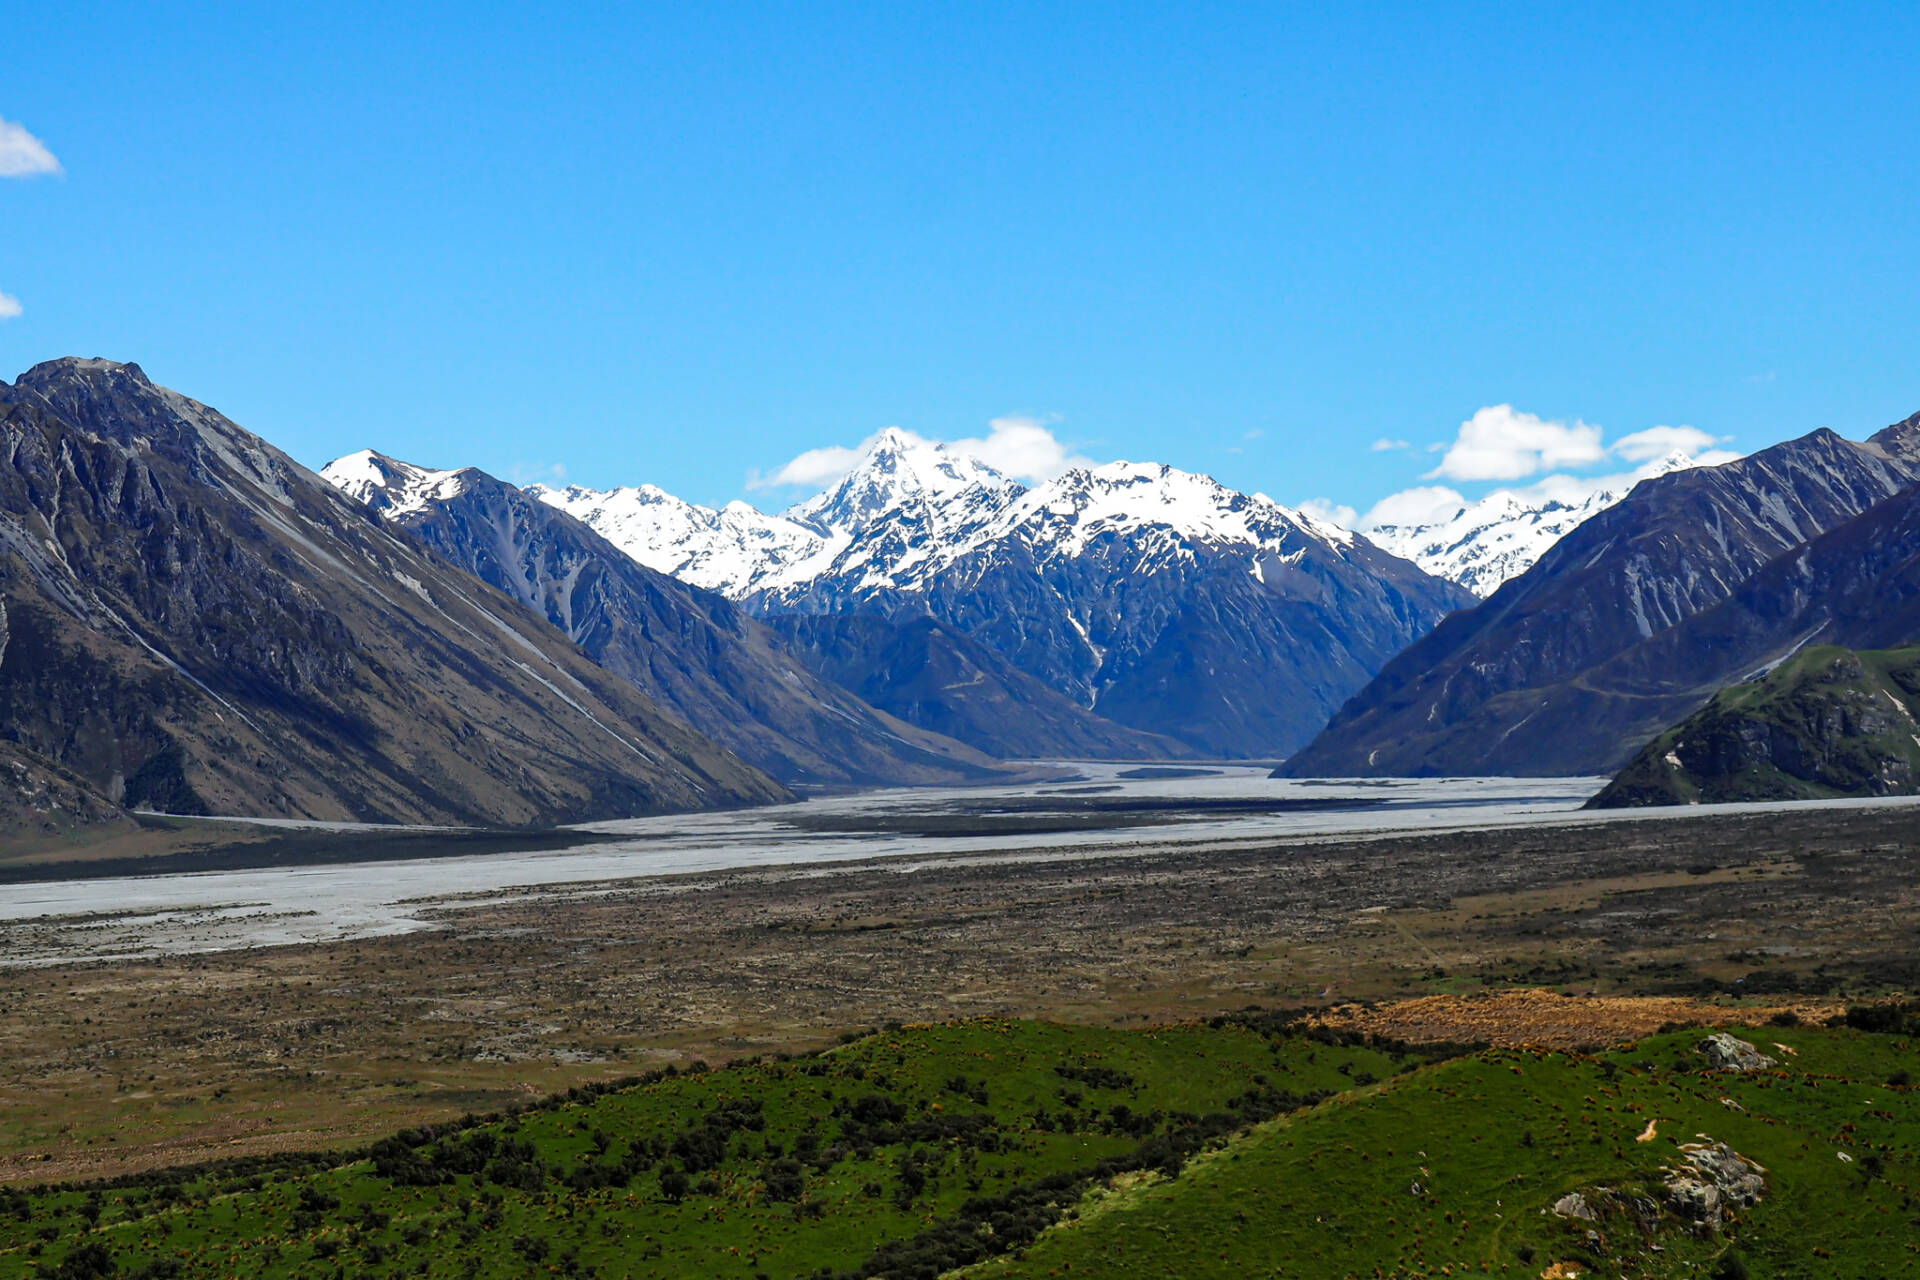 "View out across the Rangitata River to Southern Alps"